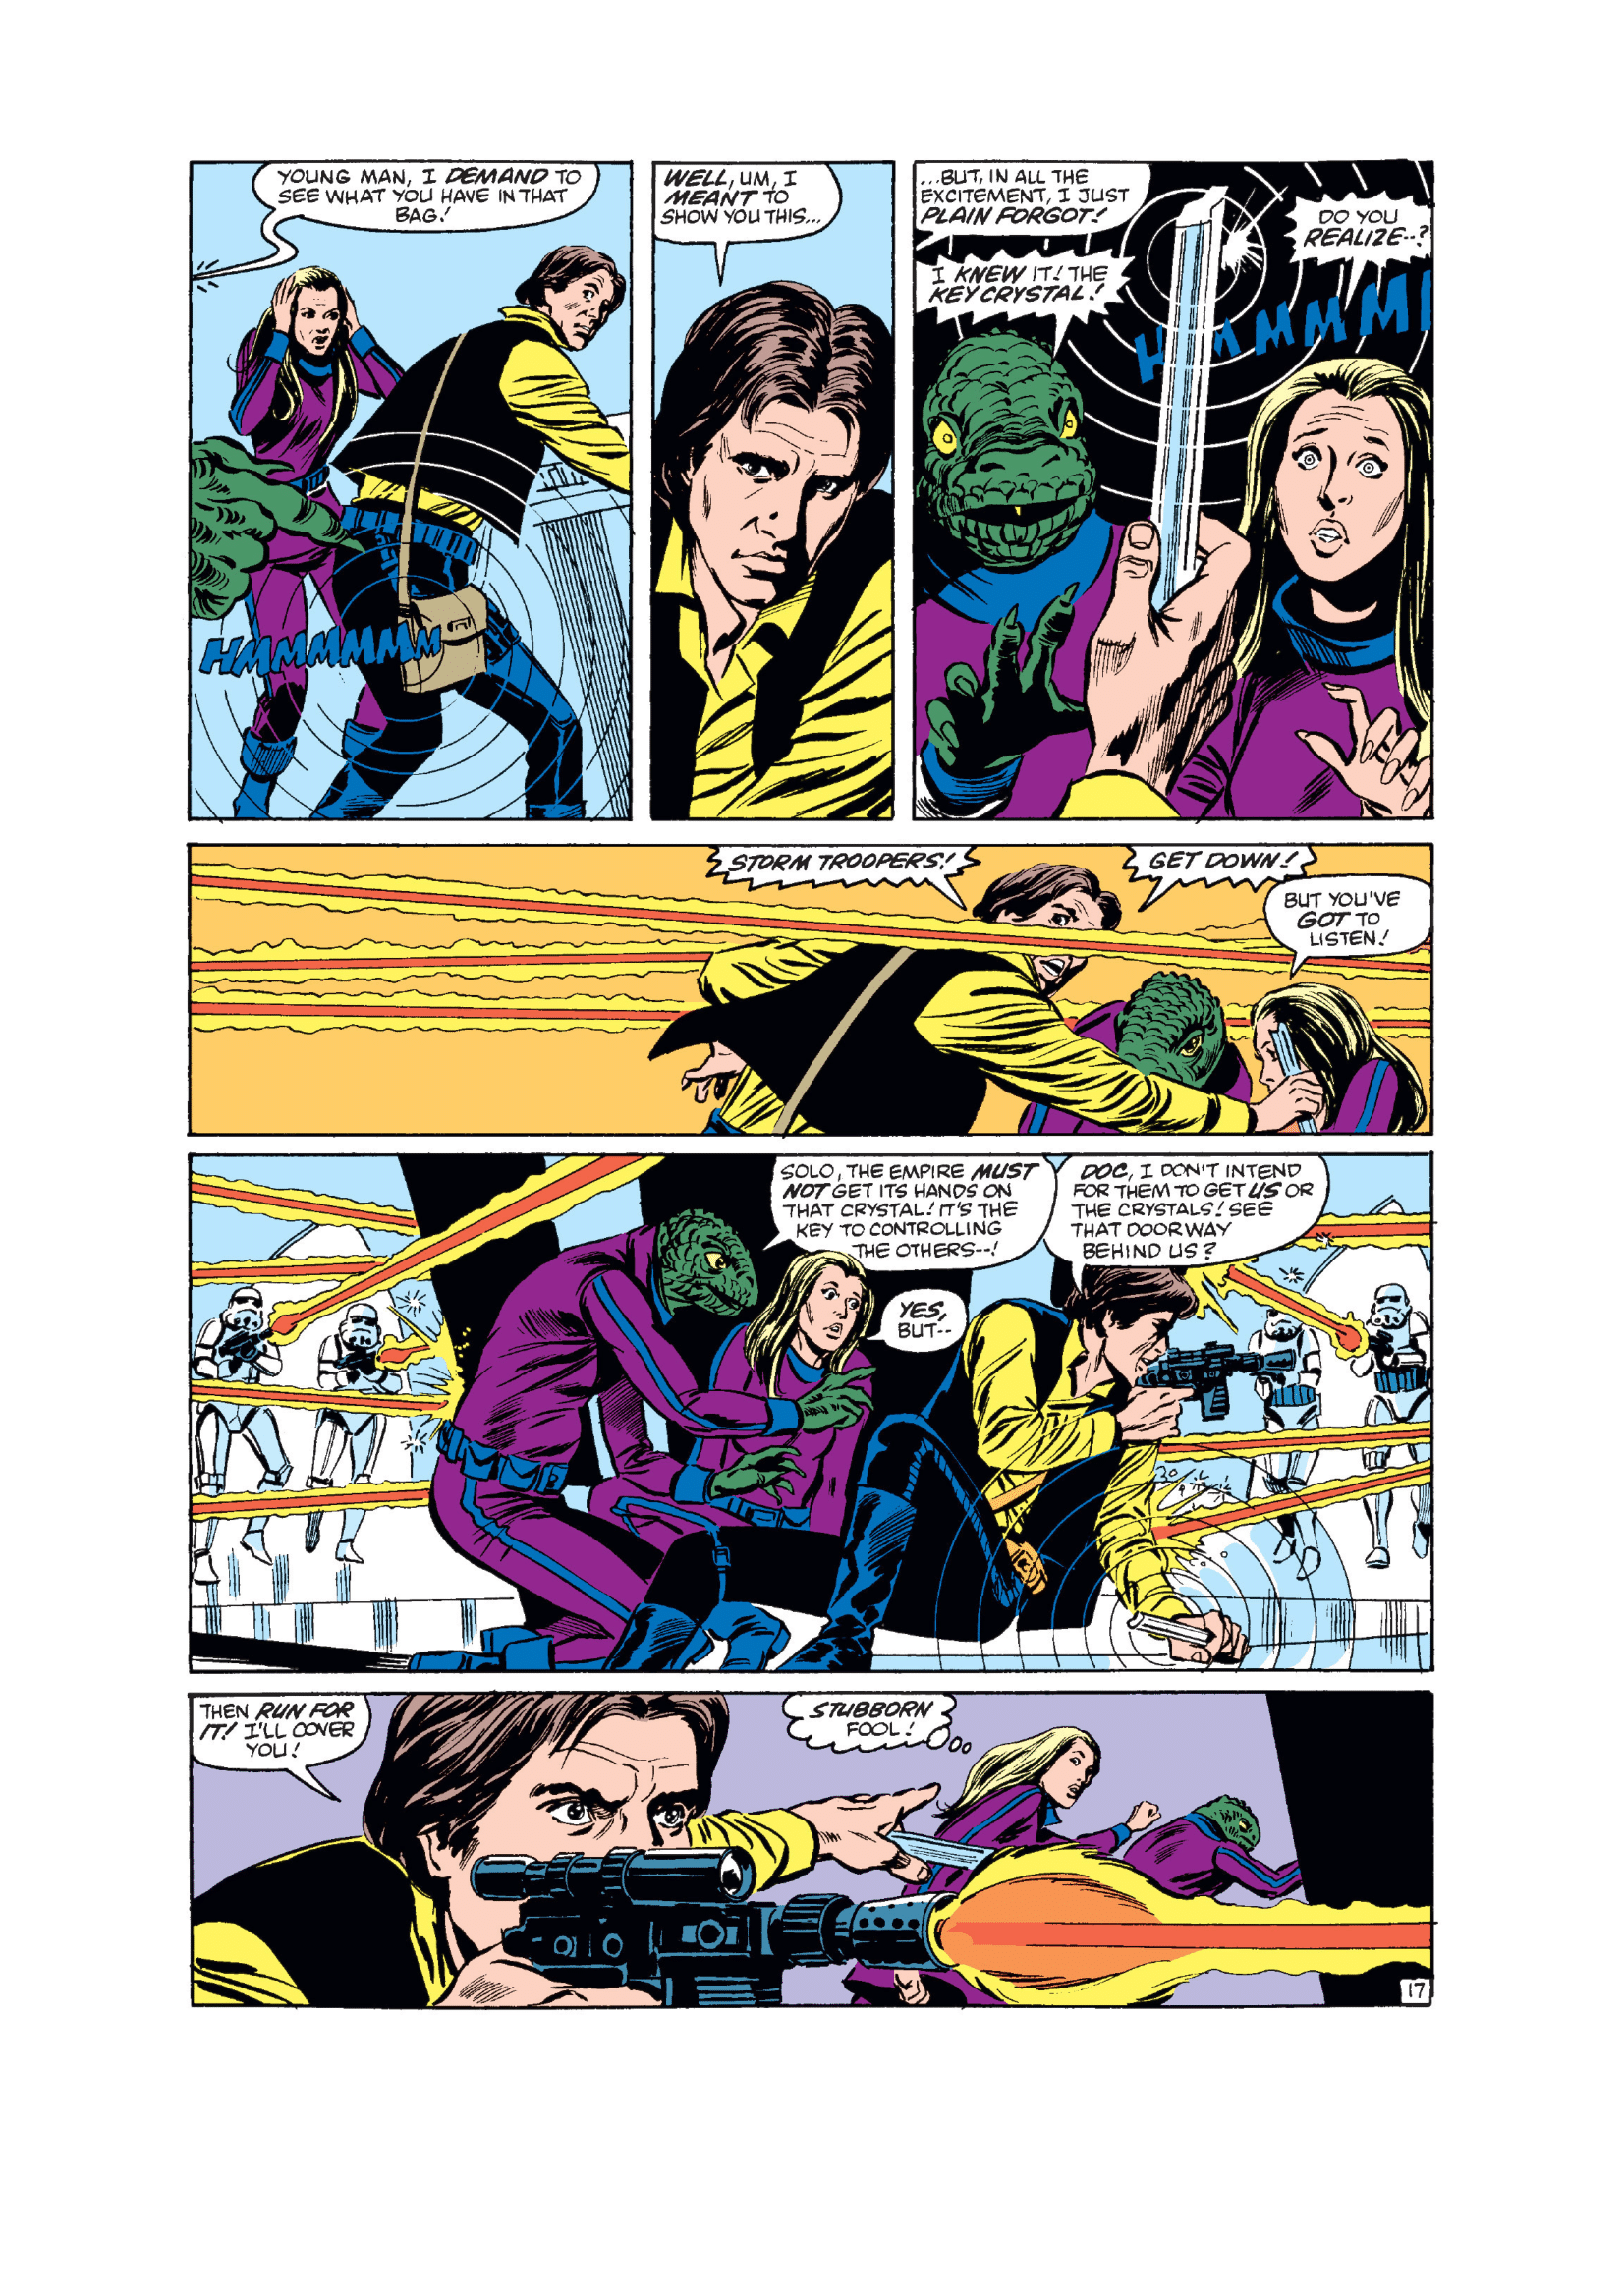 Star Wars (1977) Issue #_84 - Read Star Wars (1977) Issue #_84 comic online in high quality-36.png